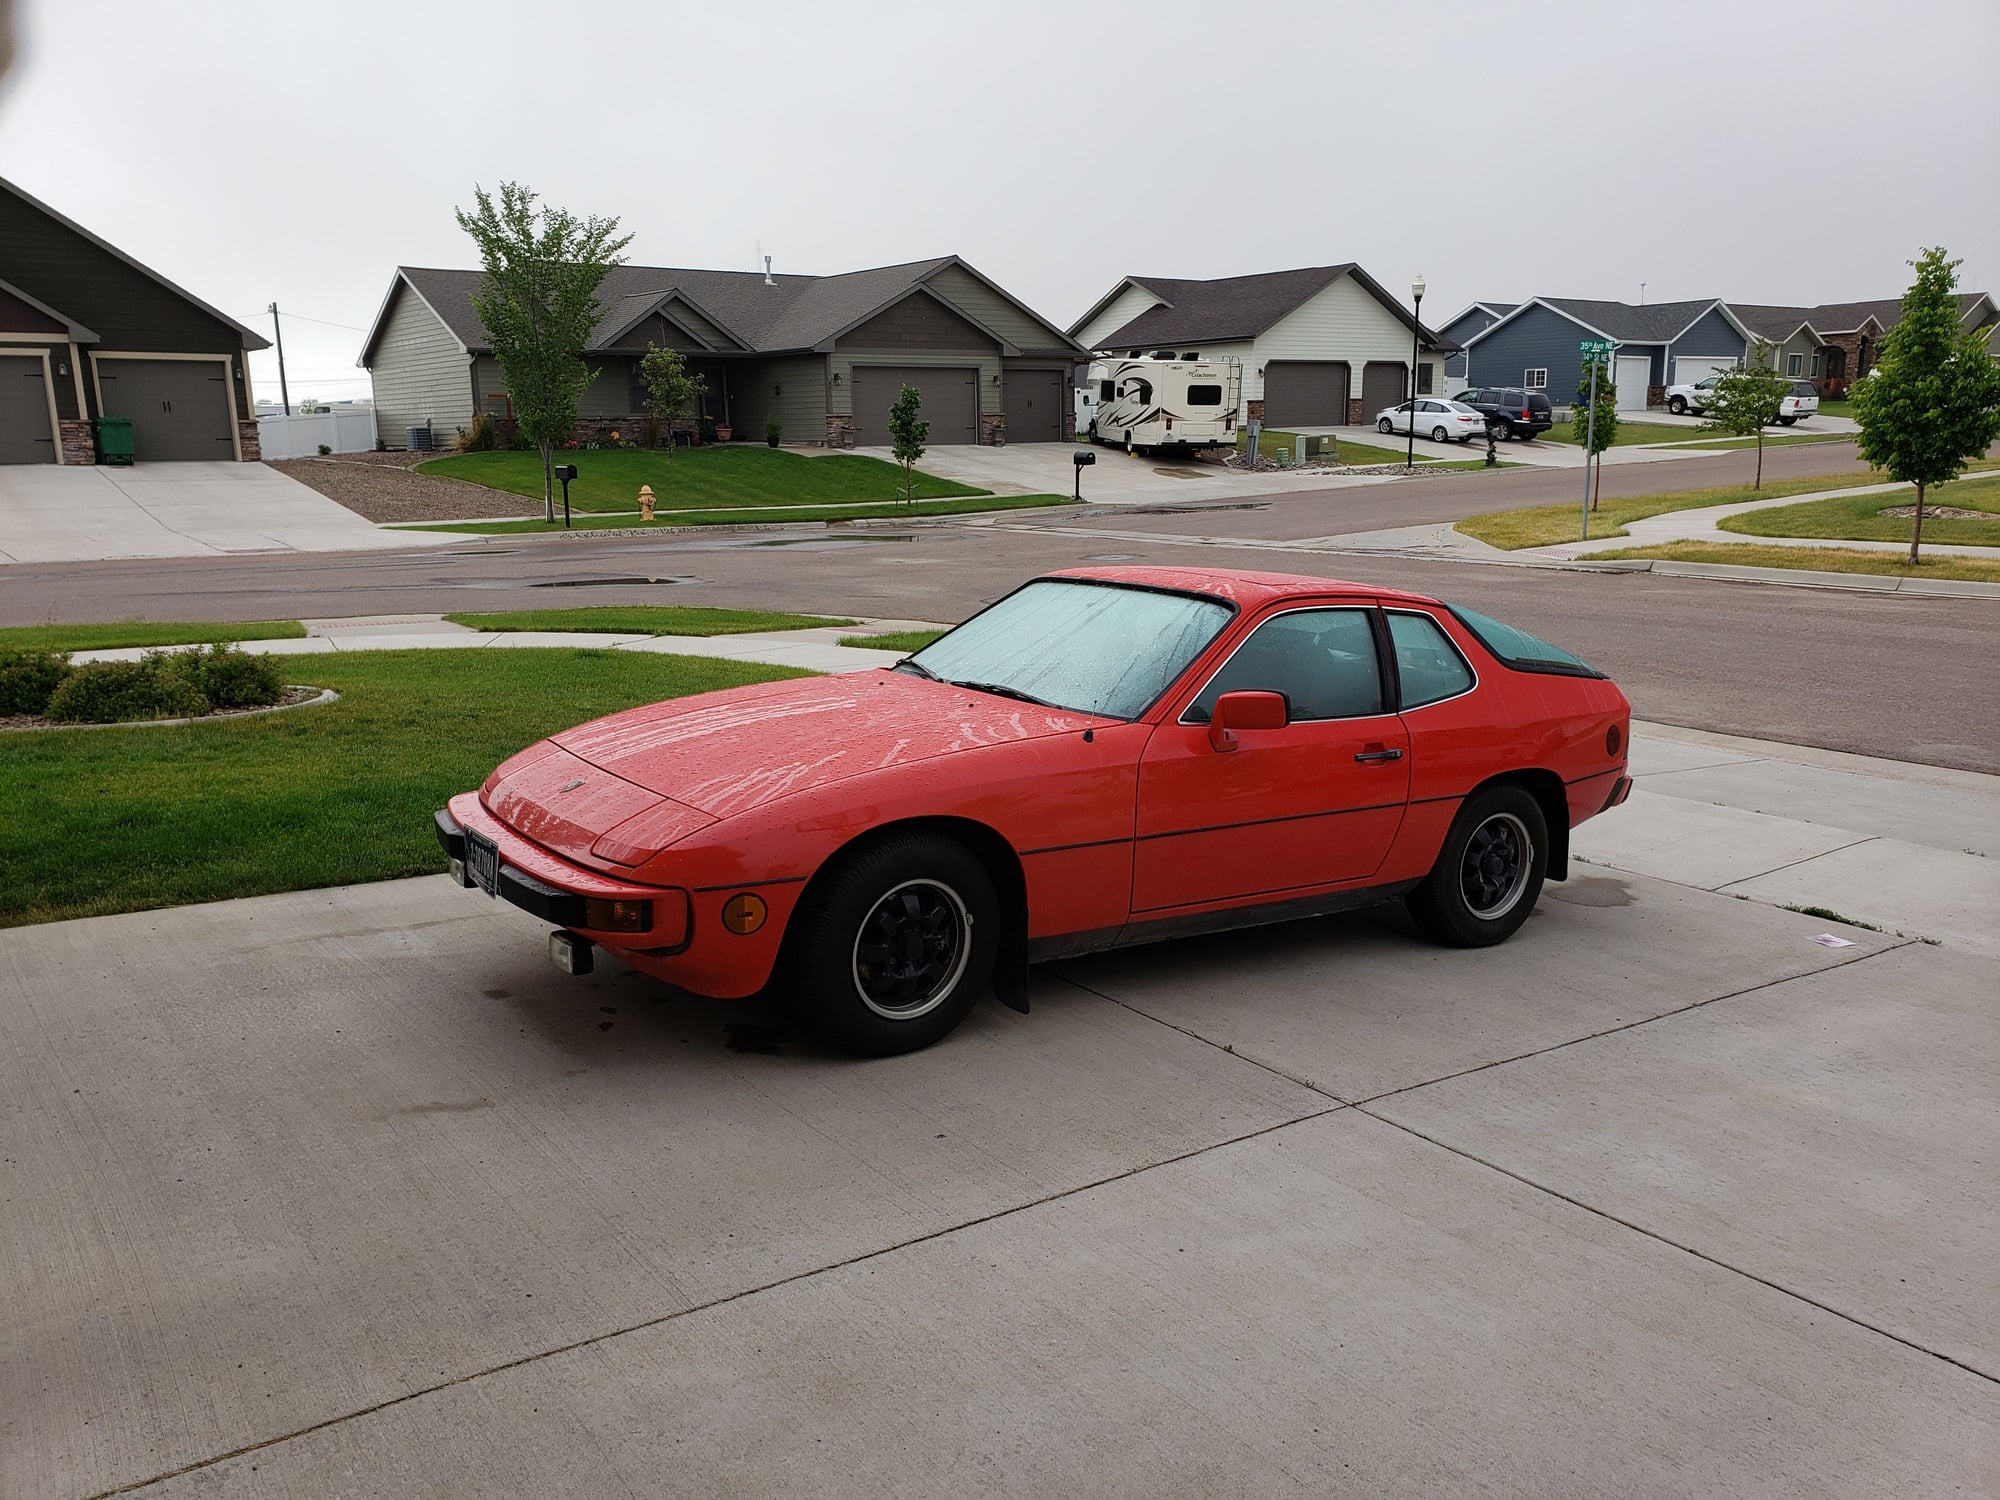 1979 Porsche 924 - Rust free 1979 Porsche 924 low miles - Used - VIN 9249206593 - 32,400 Miles - 4 cyl - 2WD - Manual - Coupe - Red - Great Falls, MT 59404, United States